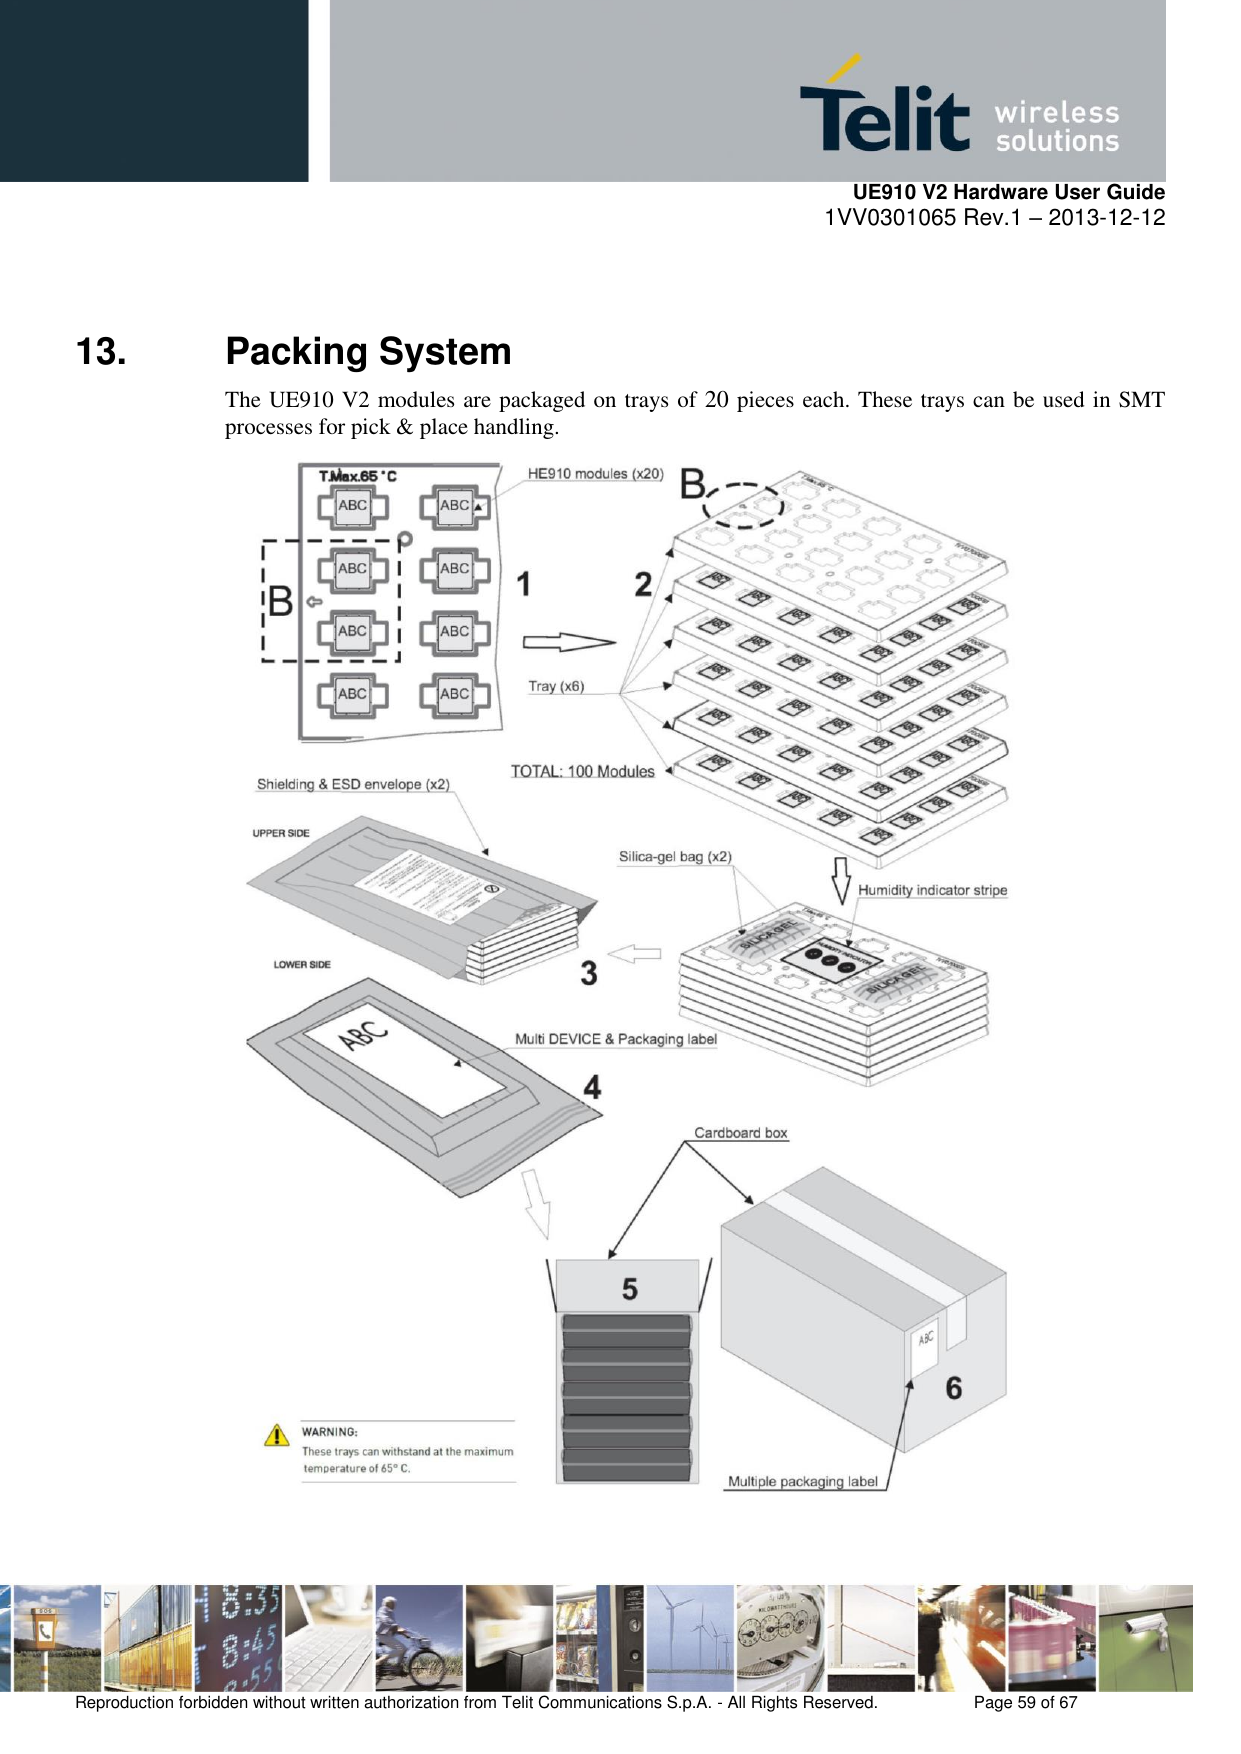     UE910 V2 Hardware User Guide 1VV0301065 Rev.1 – 2013-12-12  Reproduction forbidden without written authorization from Telit Communications S.p.A. - All Rights Reserved.    Page 59 of 67                                                     13.  Packing System The UE910 V2 modules are packaged on trays of 20 pieces each. These trays can be used in SMT processes for pick &amp; place handling.   